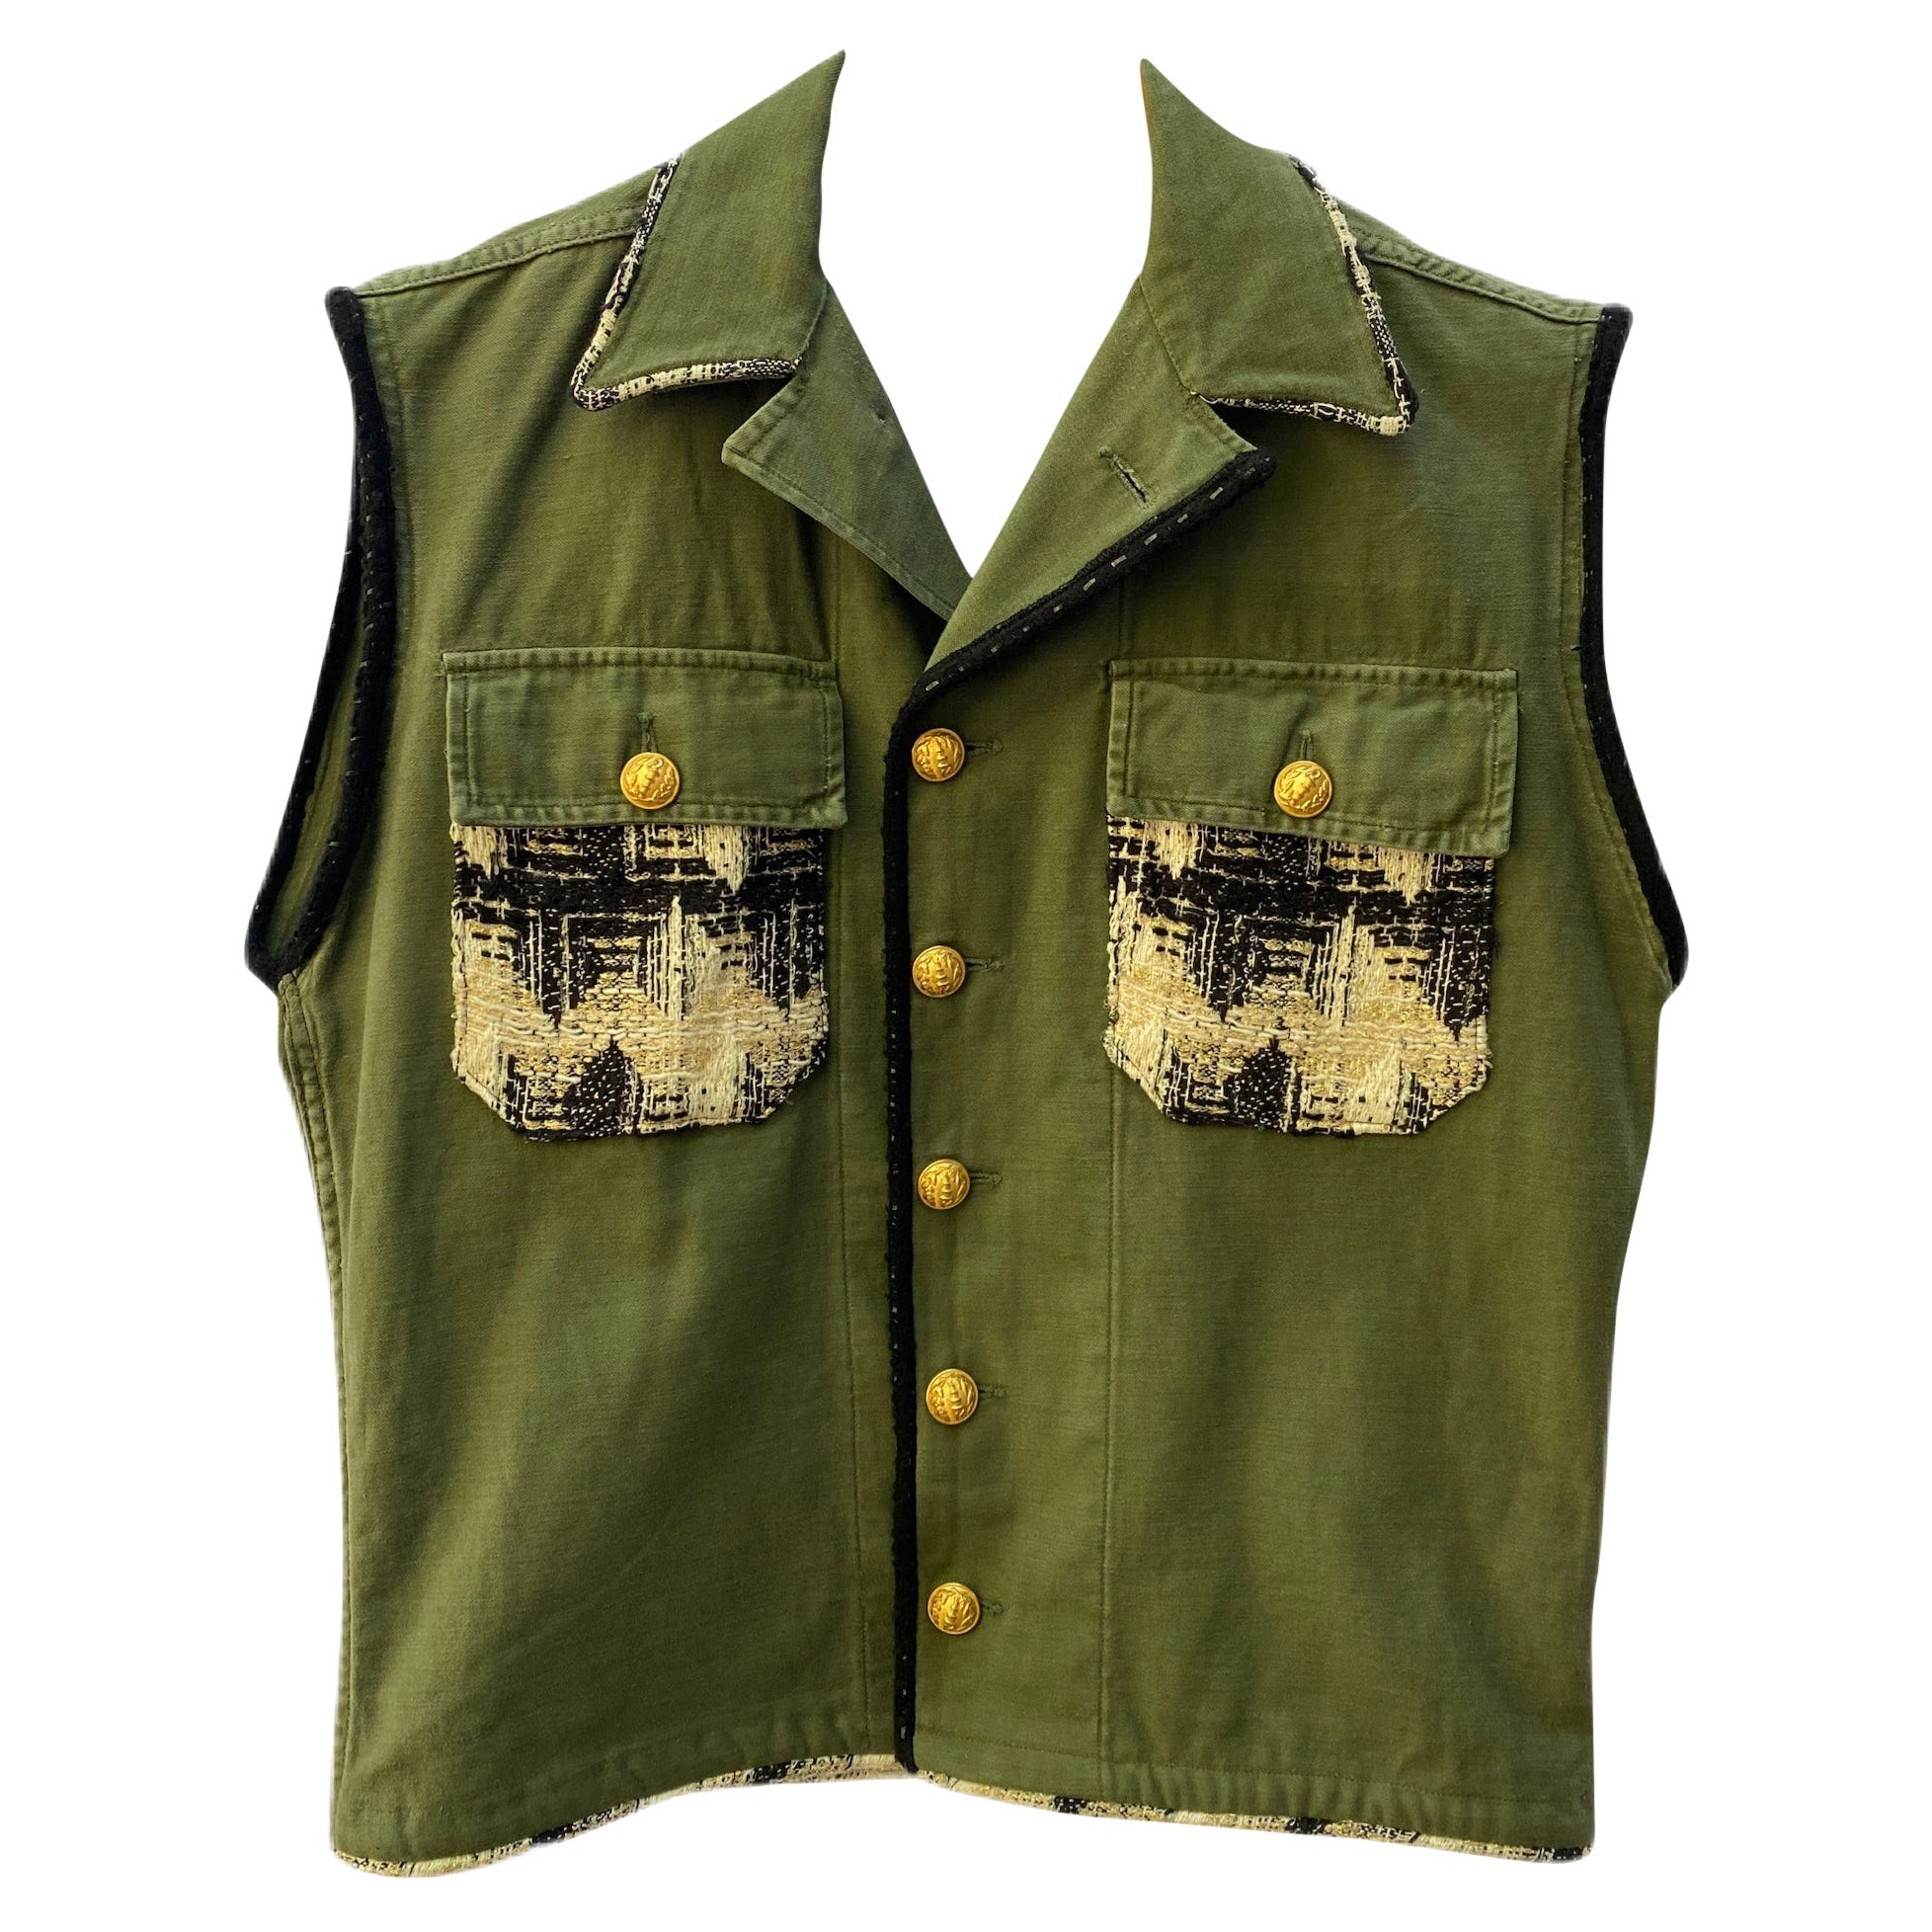 Embellished Green Sleeveless Jacket Vest Military Tweed Gold Buttons J Dauphin